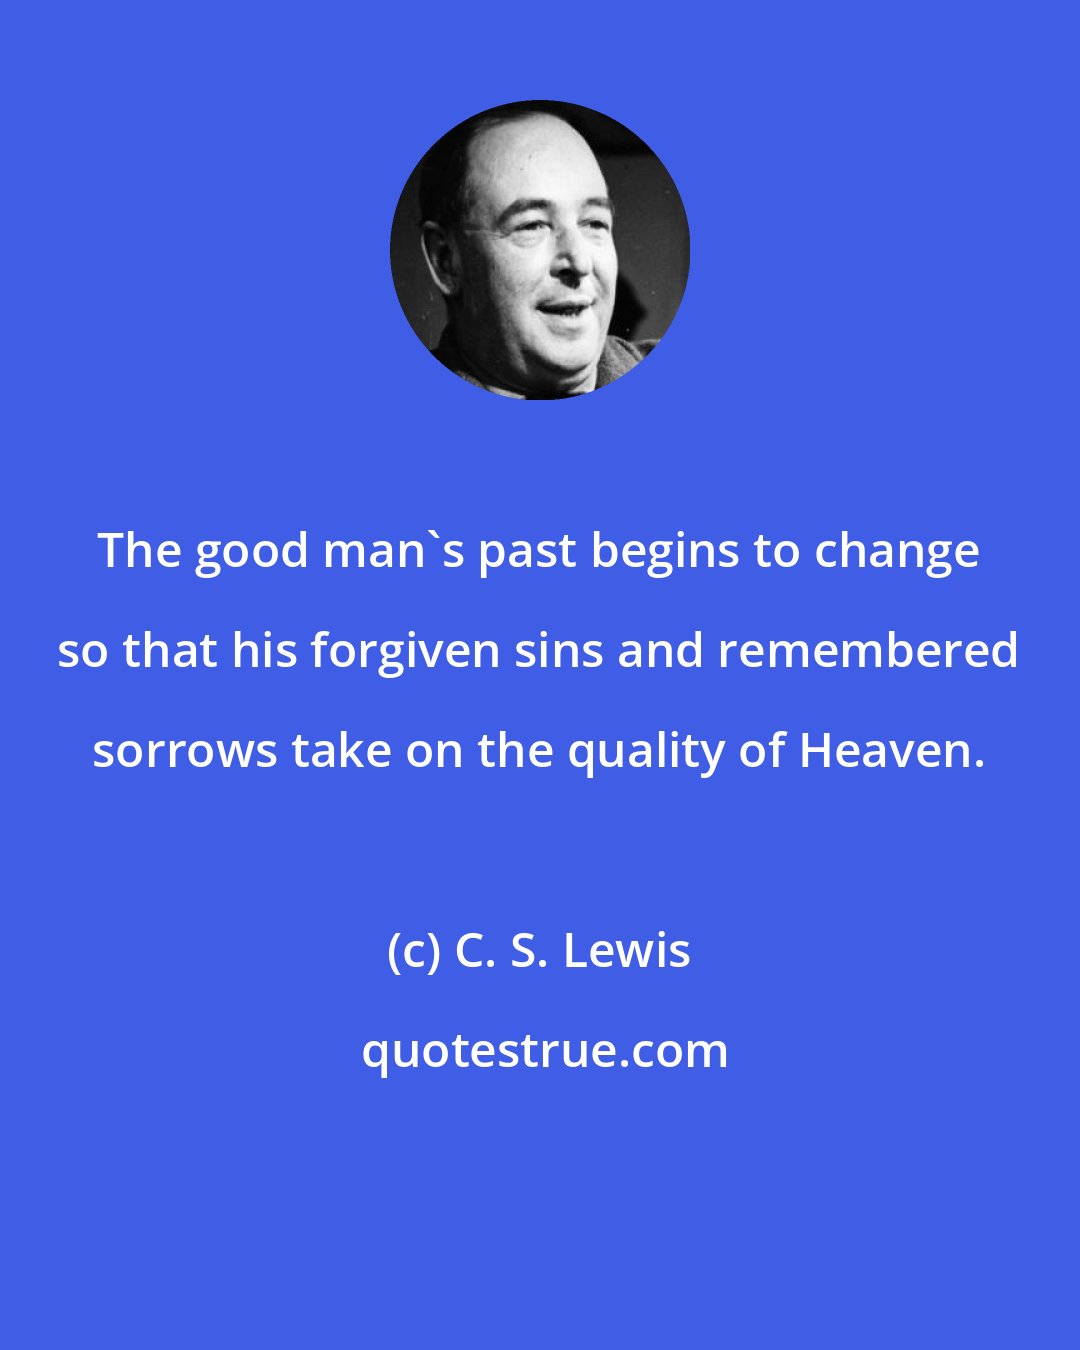 C. S. Lewis: The good man's past begins to change so that his forgiven sins and remembered sorrows take on the quality of Heaven.